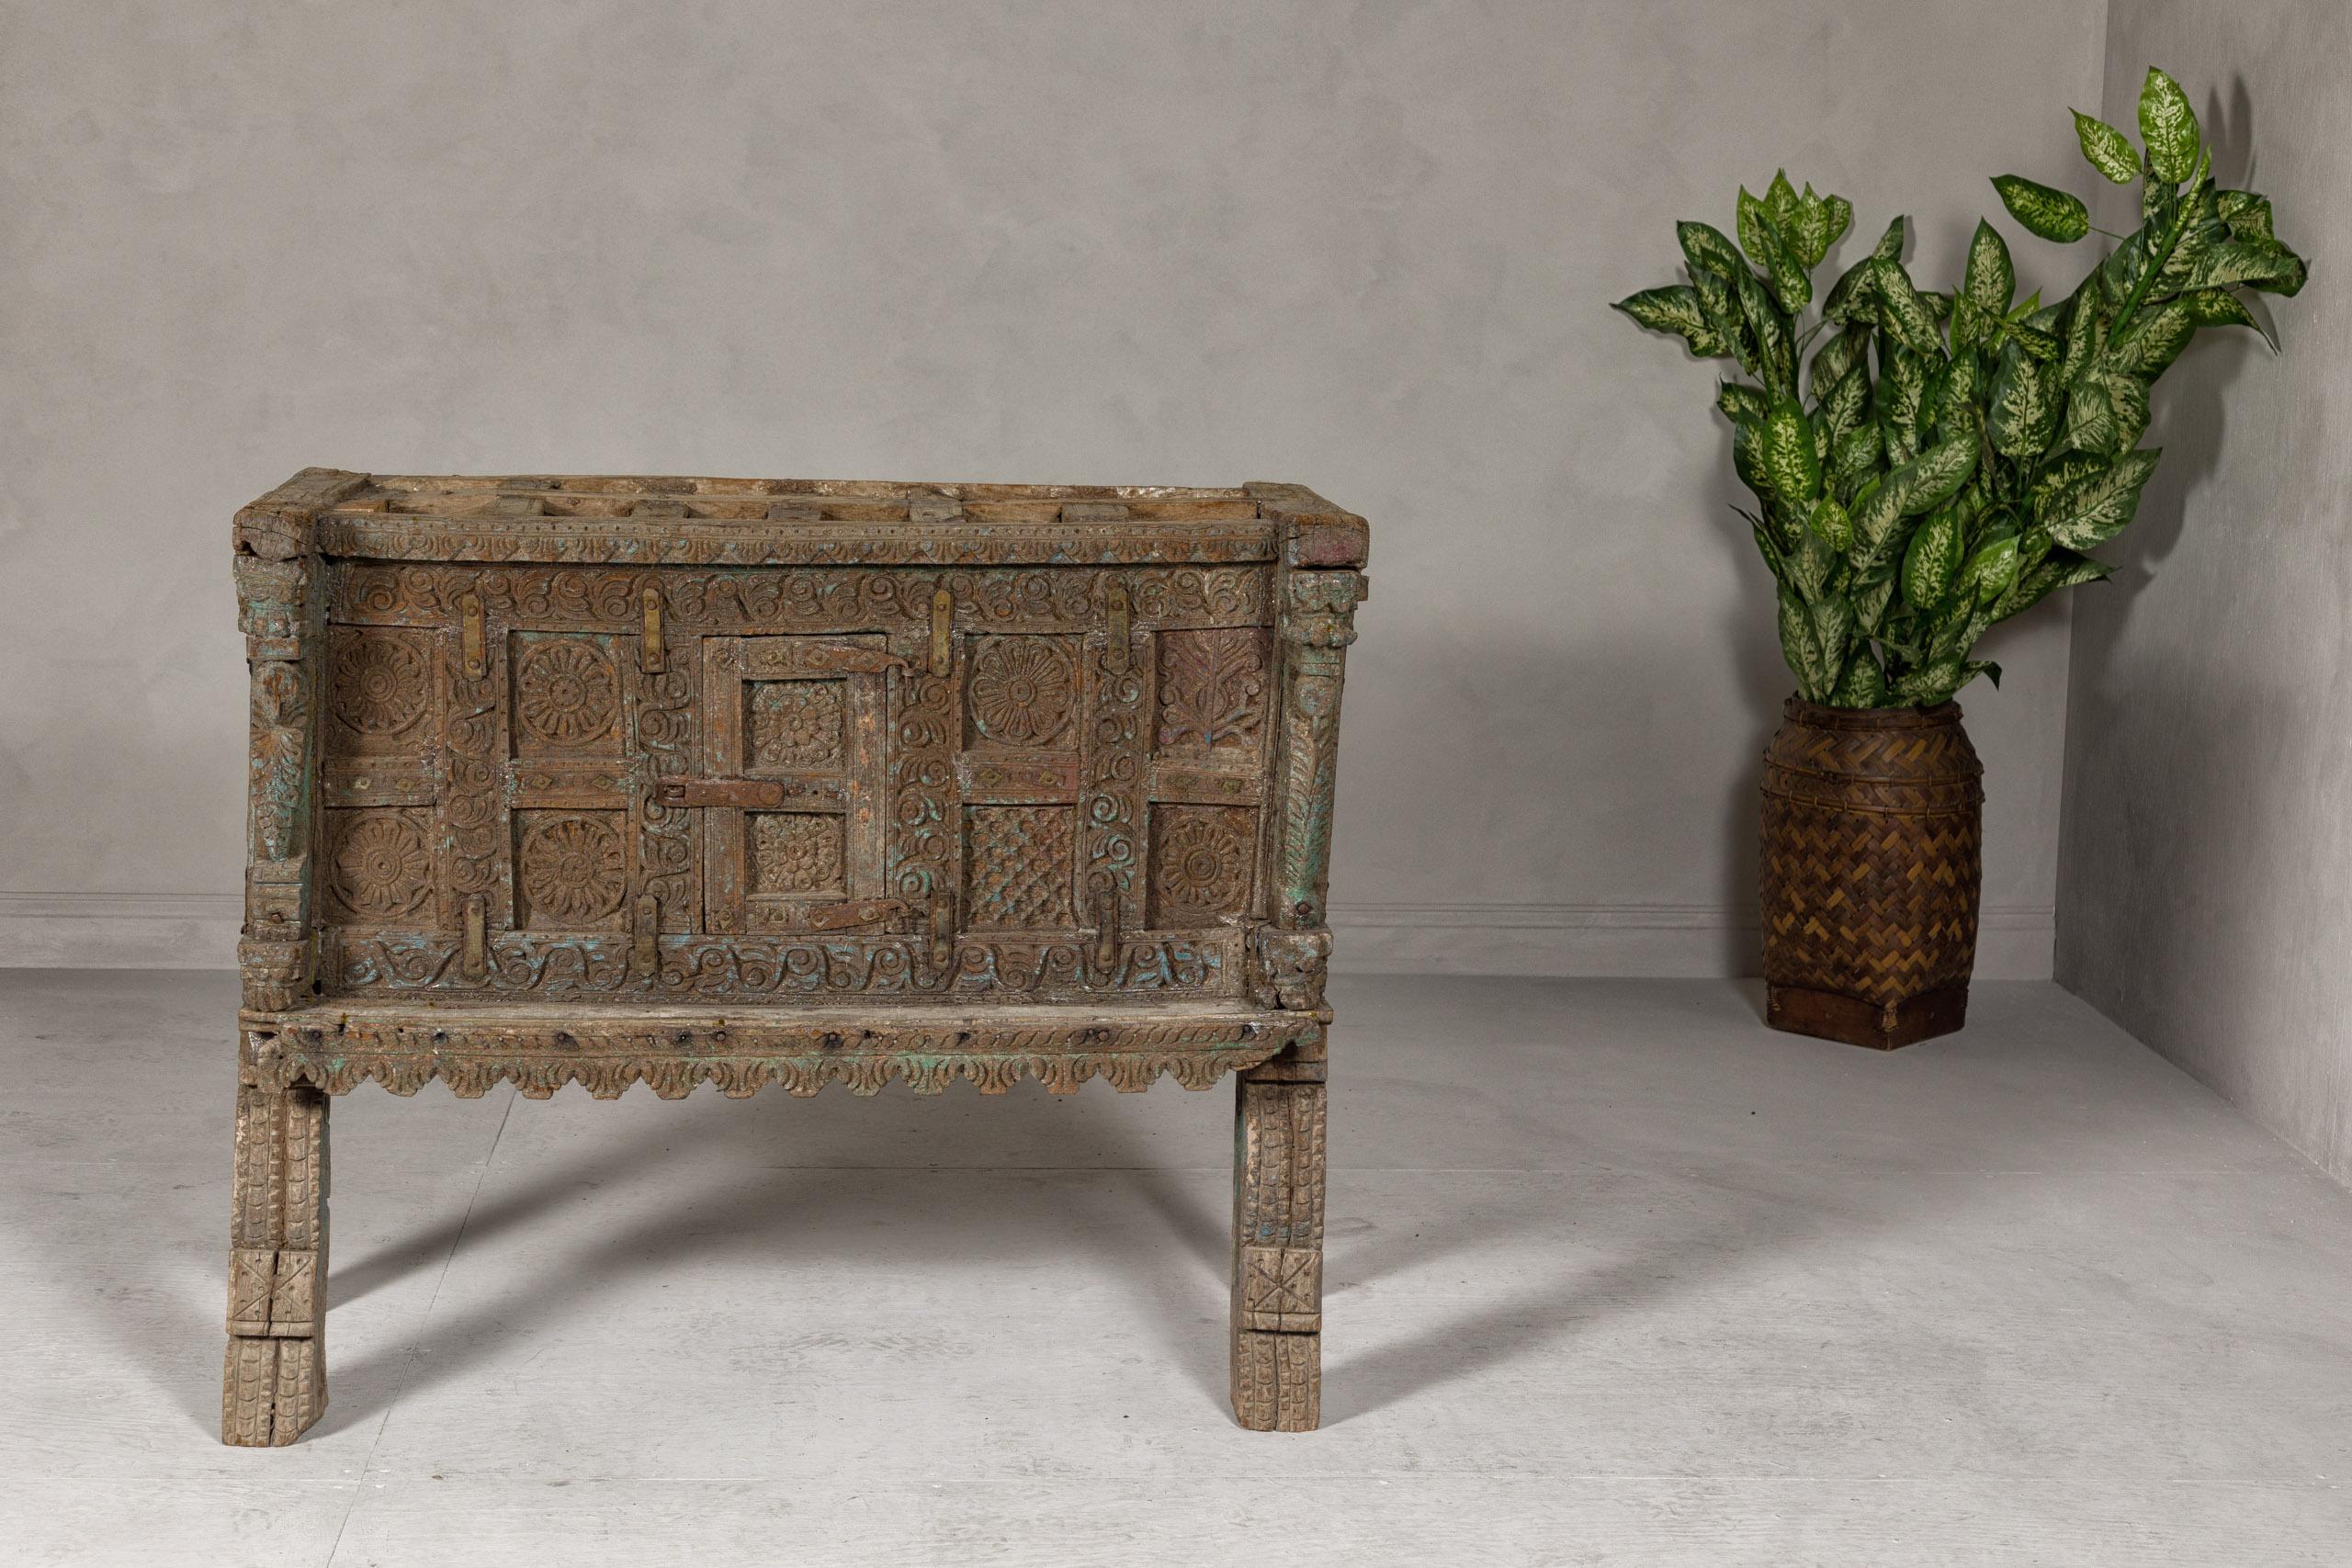 An antique rustic Indian Damachiya wedding cabinet on legs from the 19th century with abundantly carved décor and traces of paint. This 19th-century rustic Indian Damachiya wedding cabinet is a magnificent example of traditional craftsmanship,